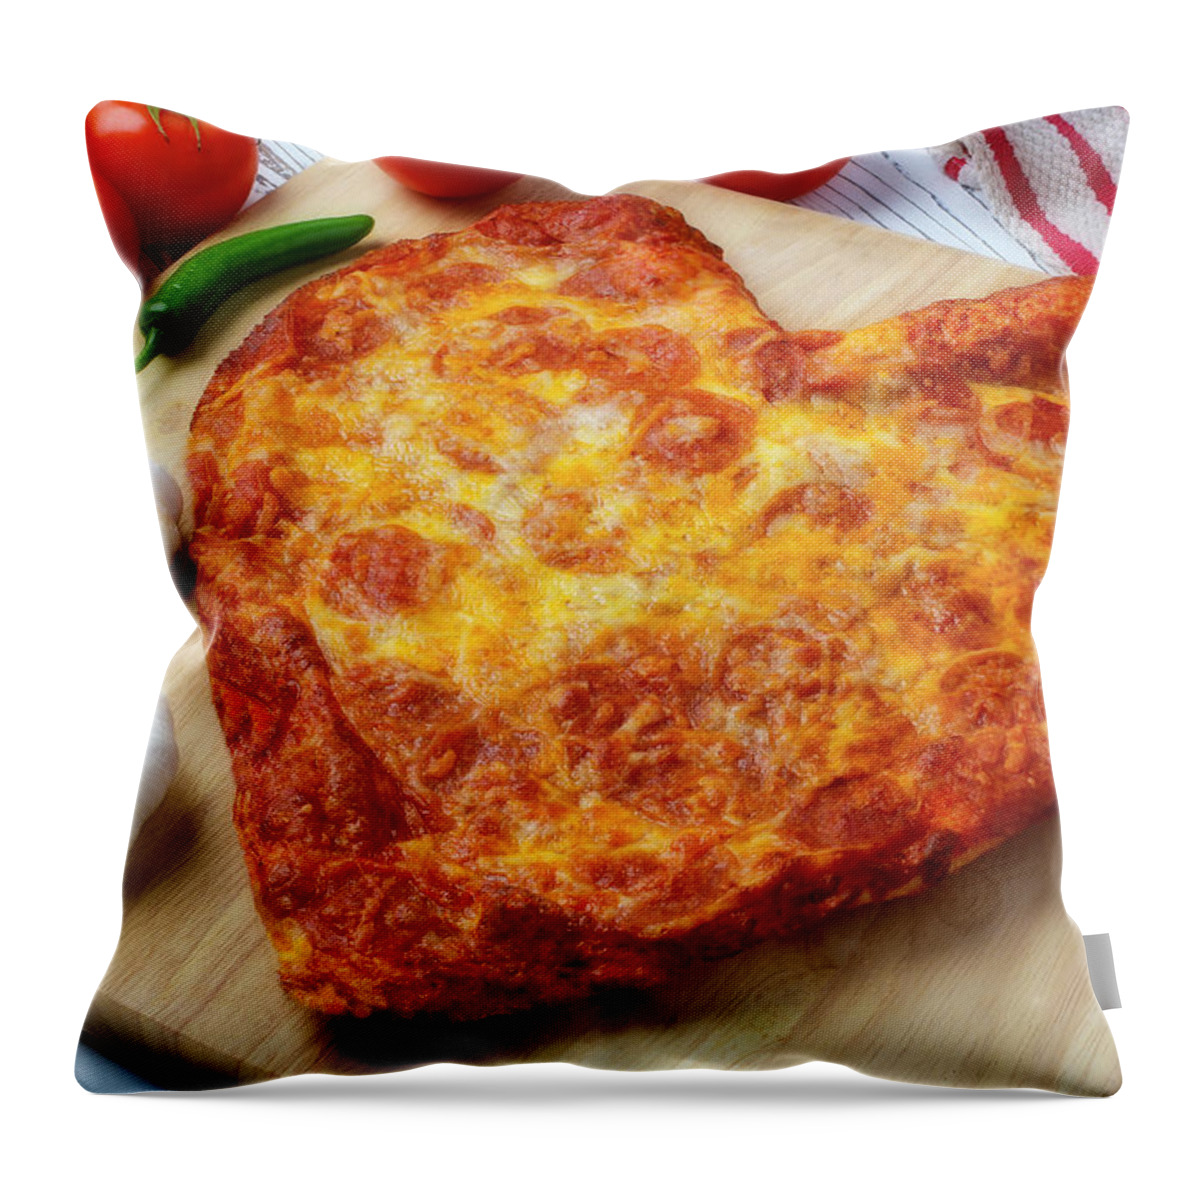 Heart Throw Pillow featuring the photograph Heart Pizza by Garry Gay